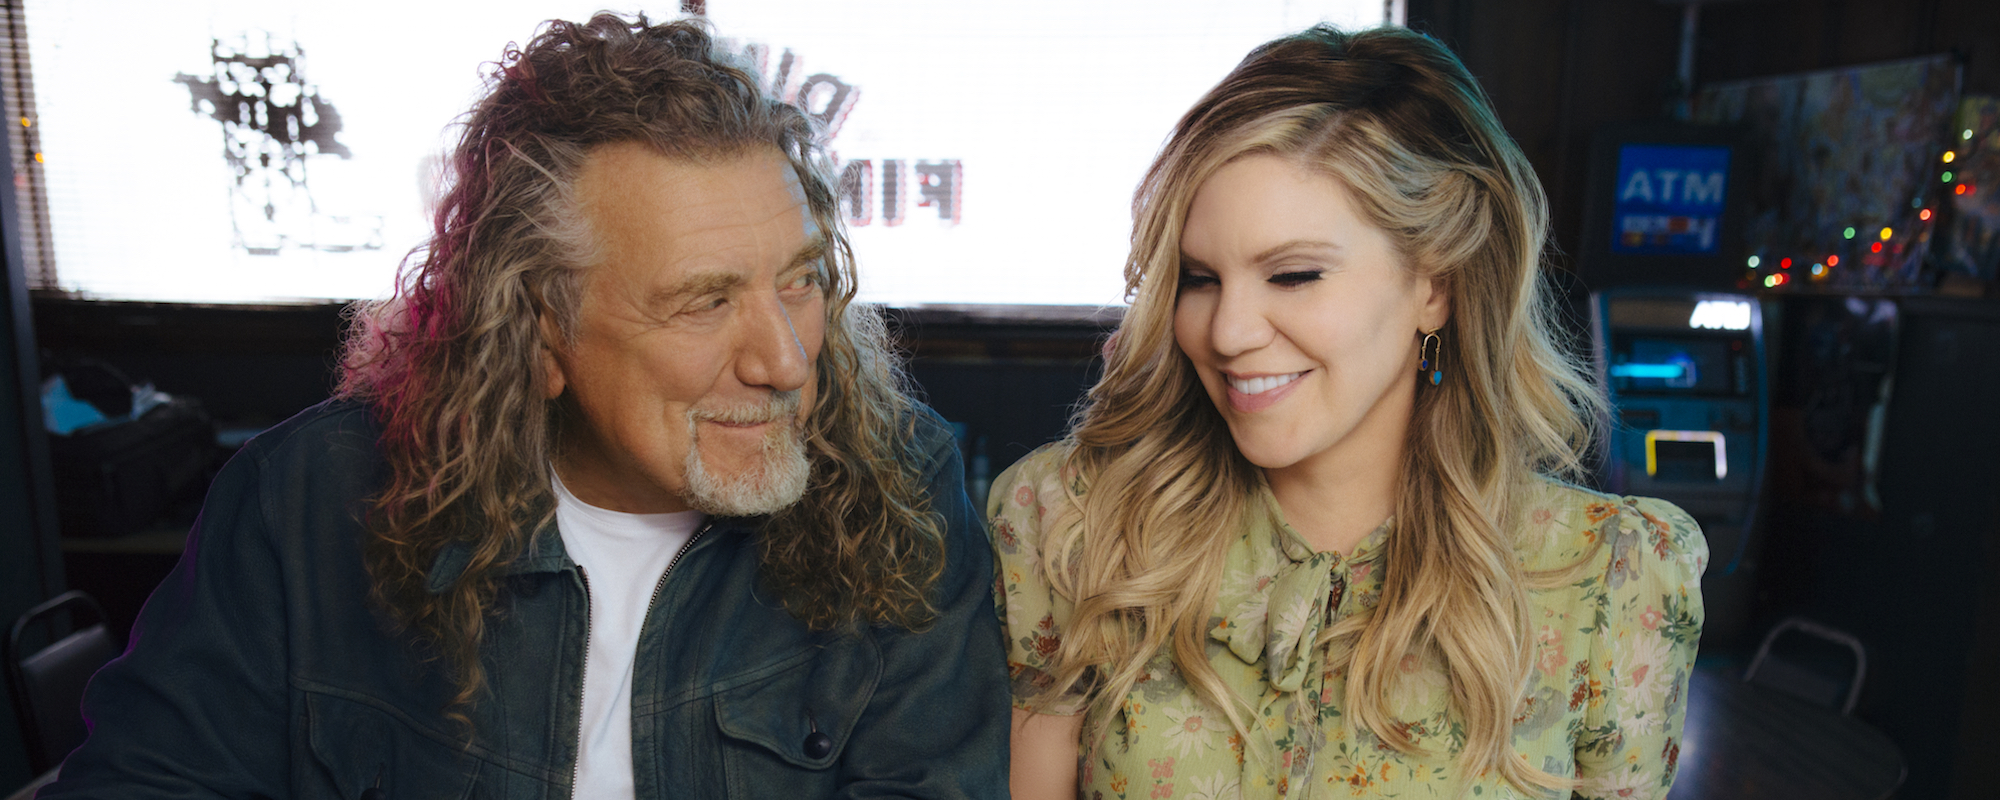 Robert Plant and Alison Krauss Perform “Can’t Let Go” on ‘The Kelly Clarkson Show’